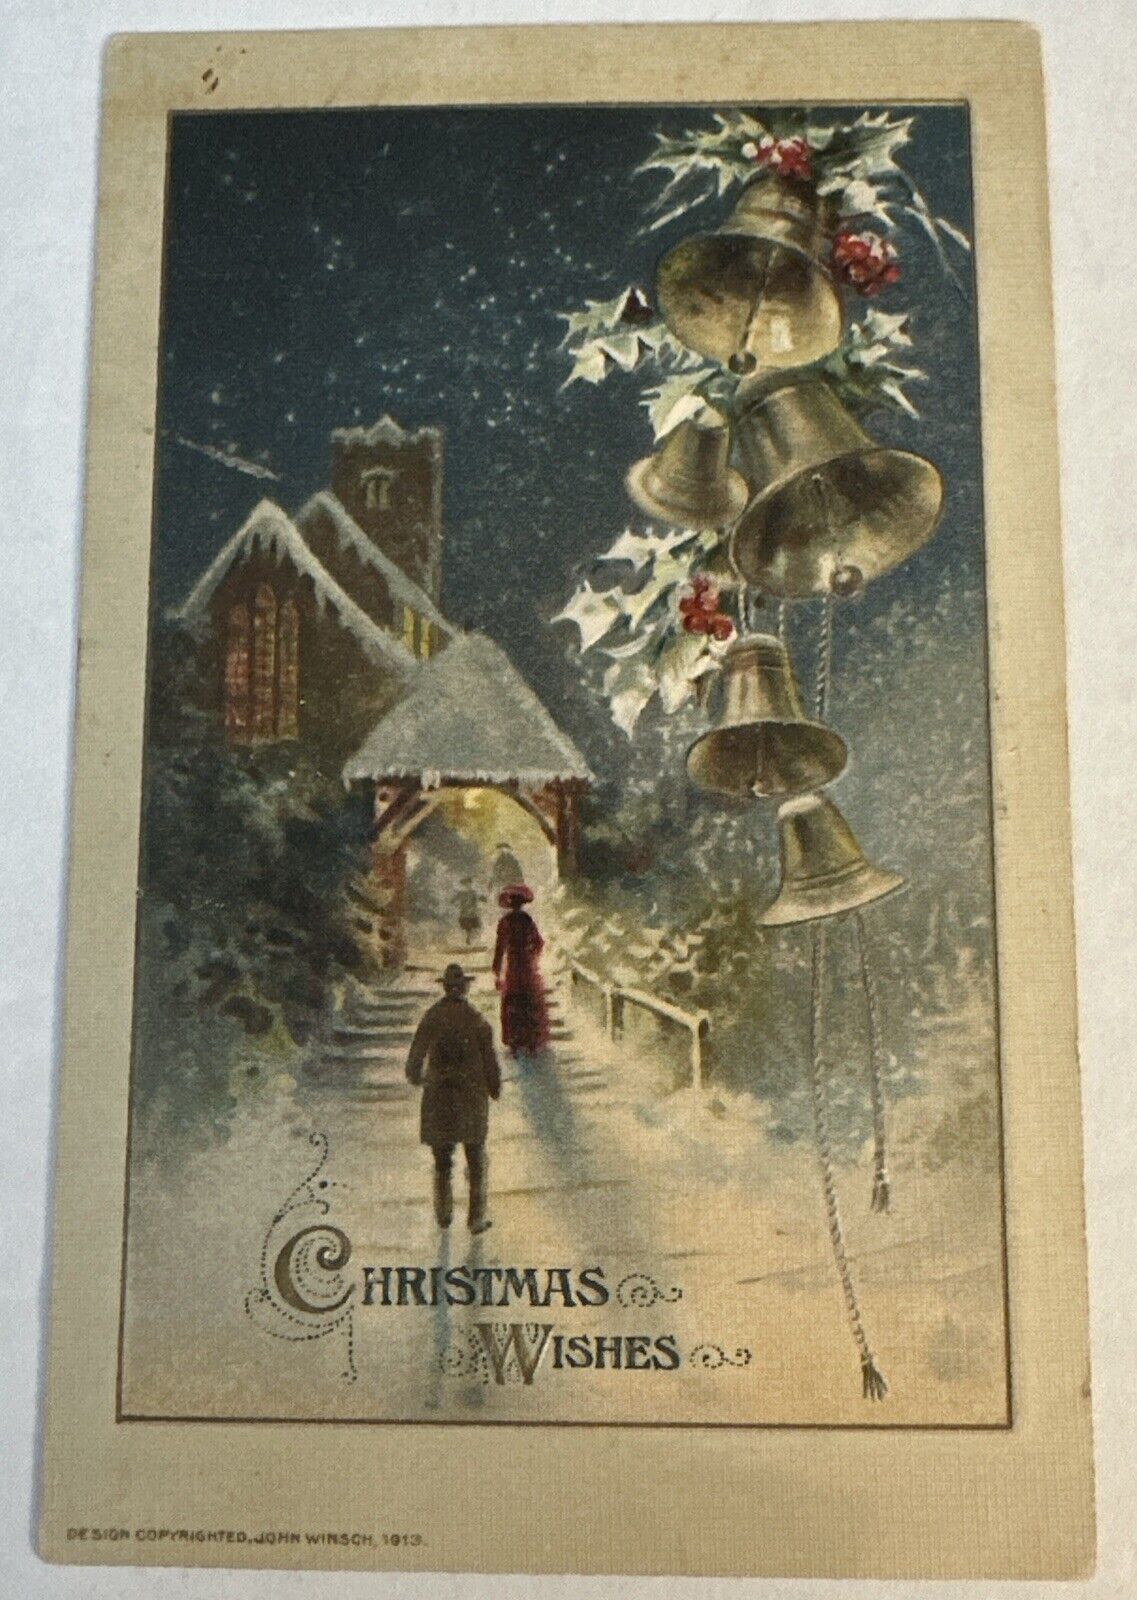 Winsch Christmas Wishes Holly Berries Snow Bells c1911 Vintage Postcard Embossed